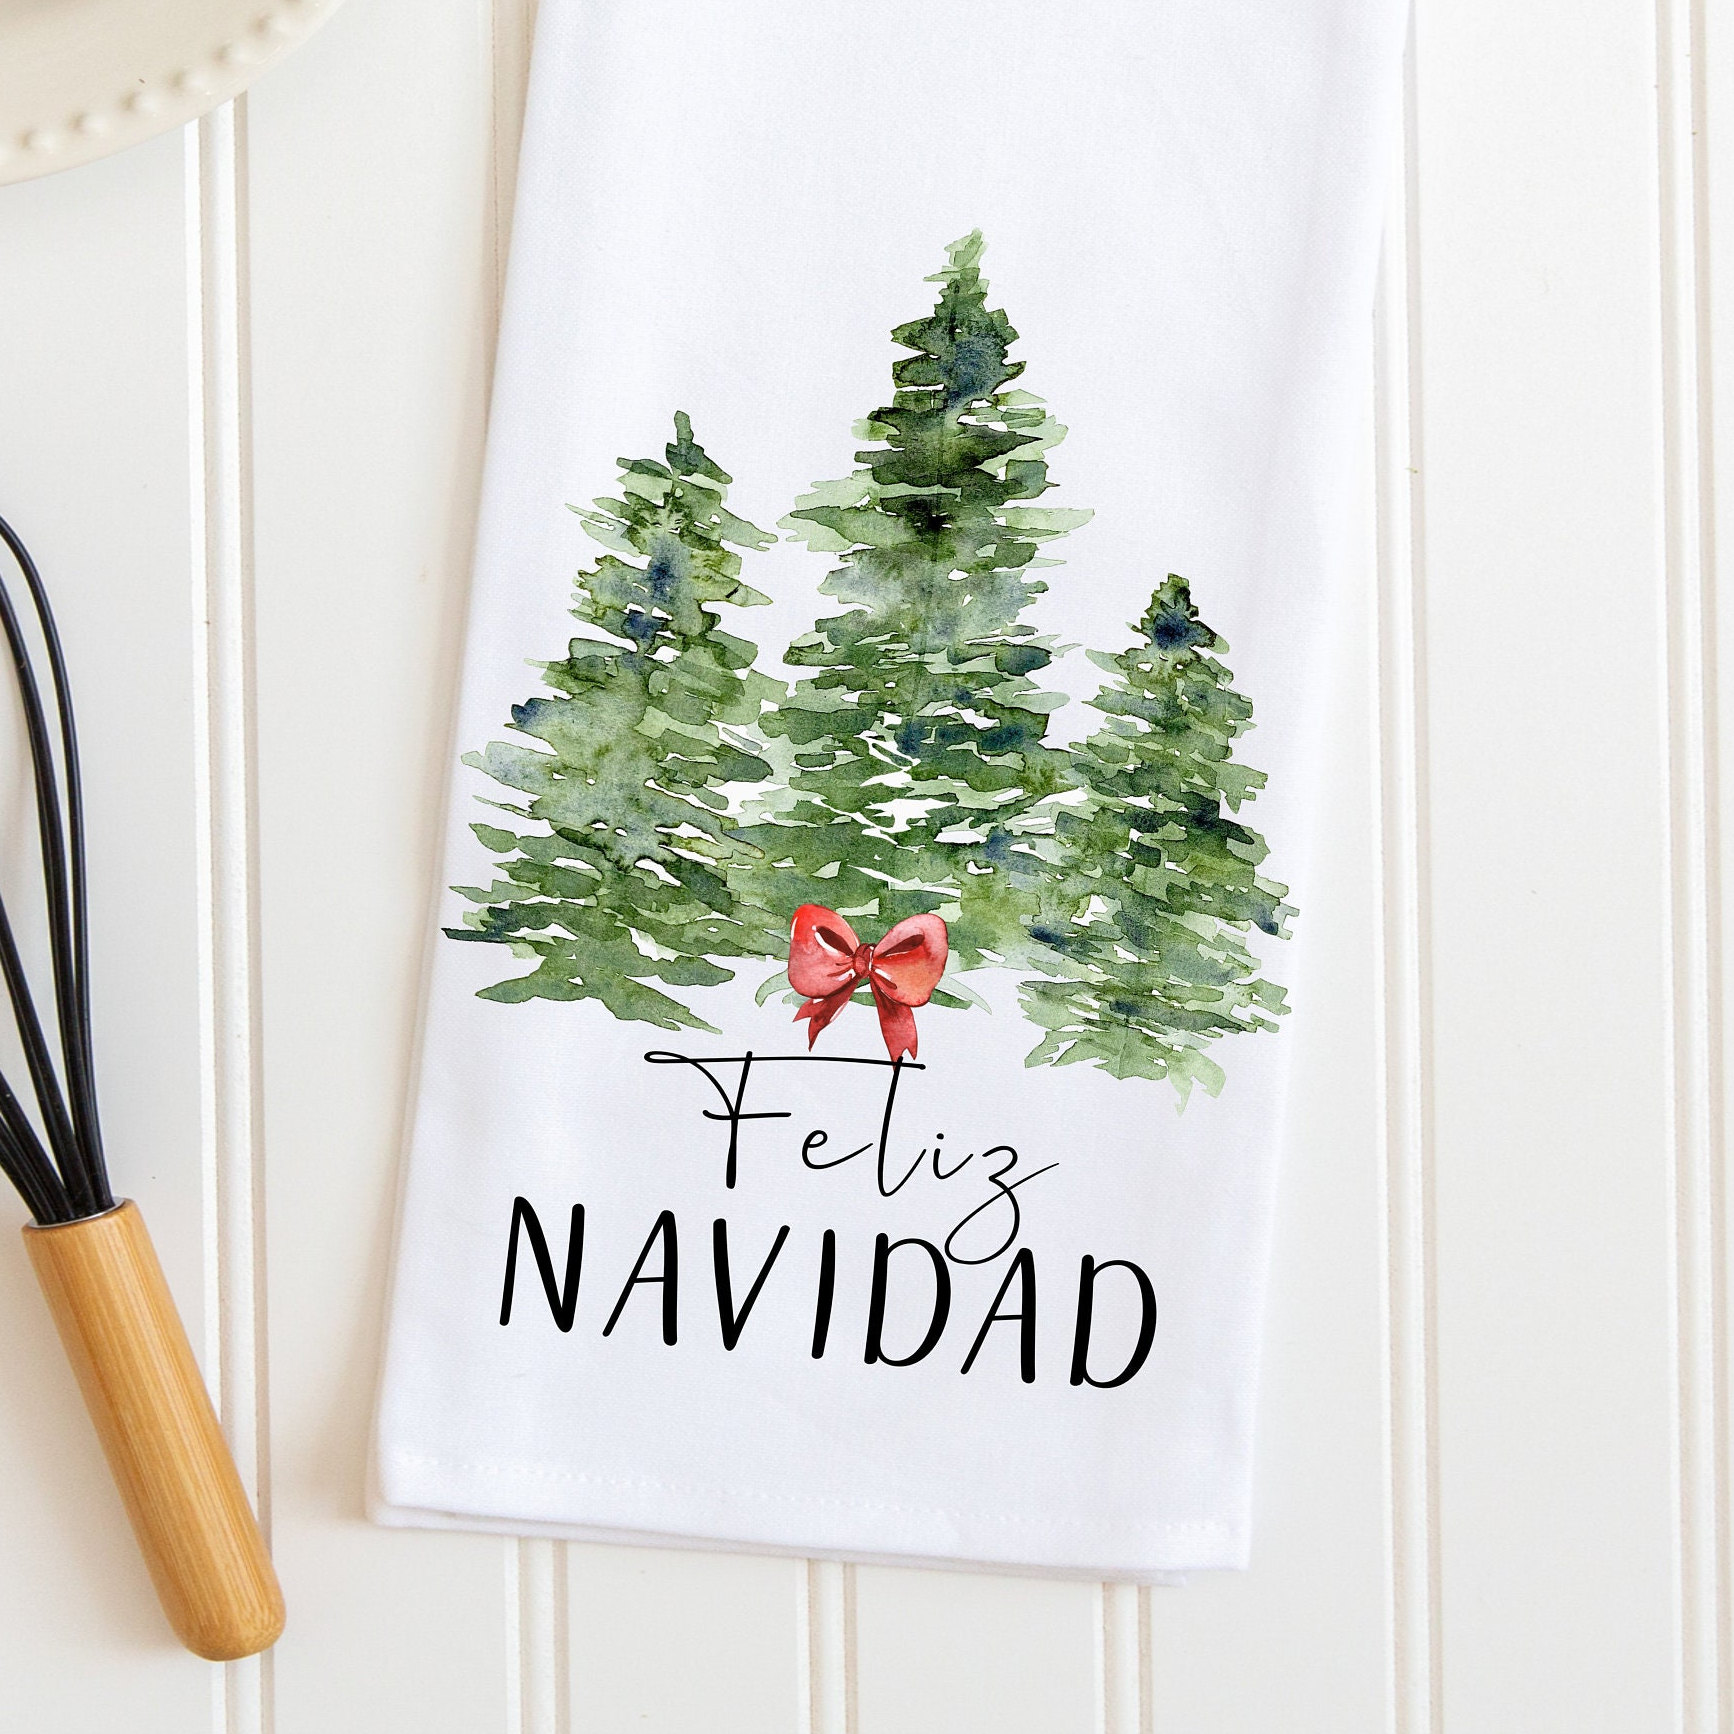 Home for the Holidays Custom Christmas Kitchen Tea Towels